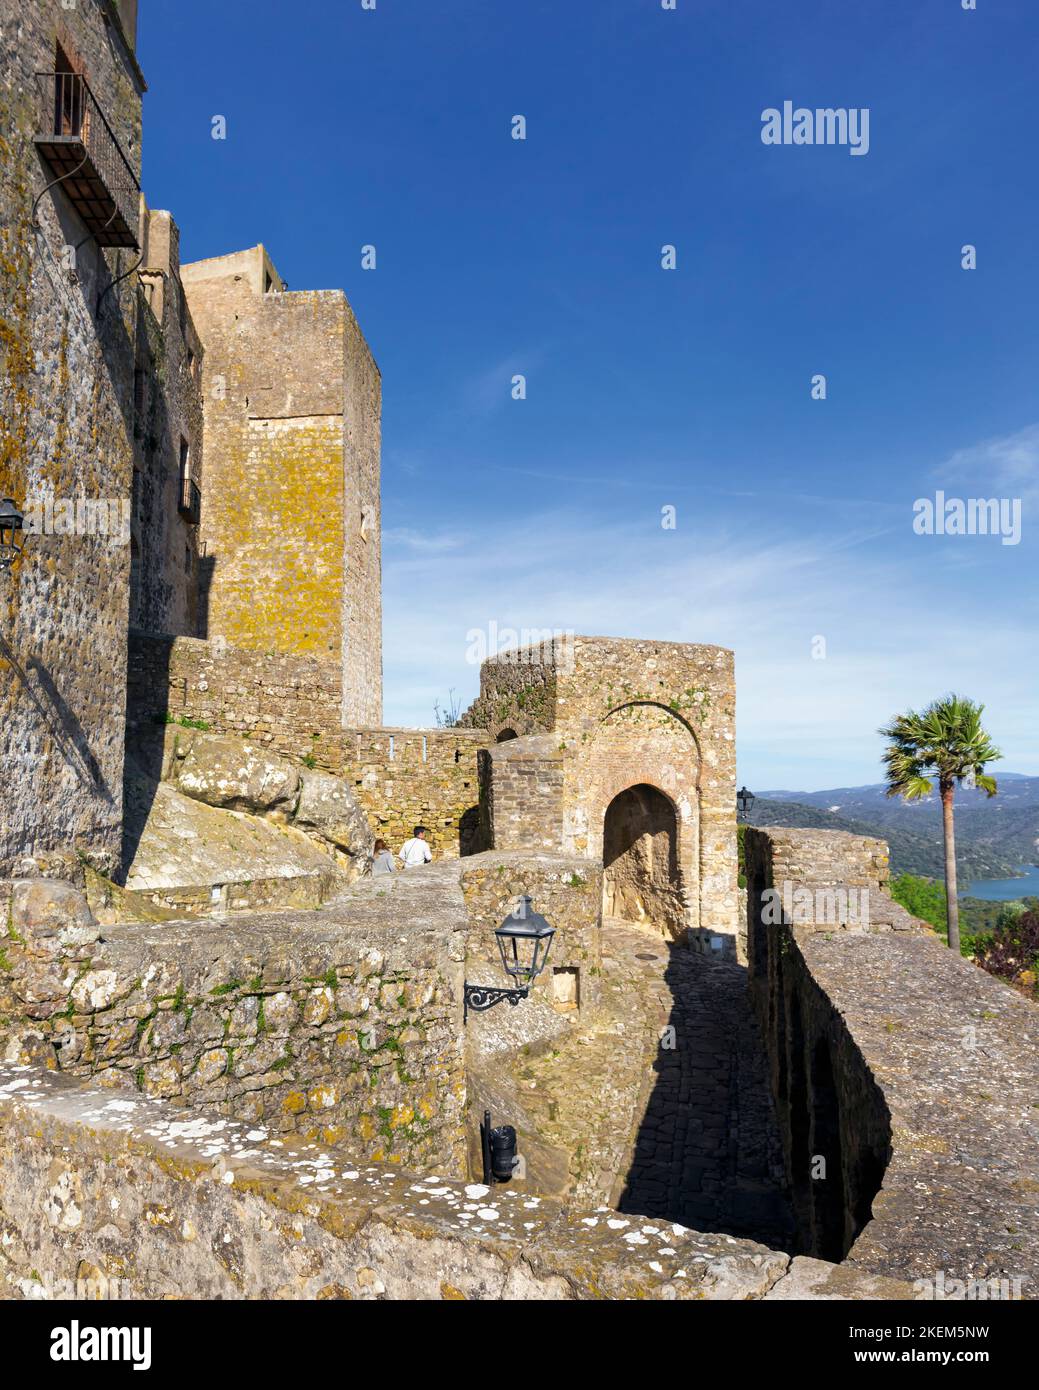 Castellar de la Frontera, Cadiz Province, Andalusia, southern Spain. Entrance to the Villa Fortaleza, or fortified town. The fortress dates from the 1 Stock Photo